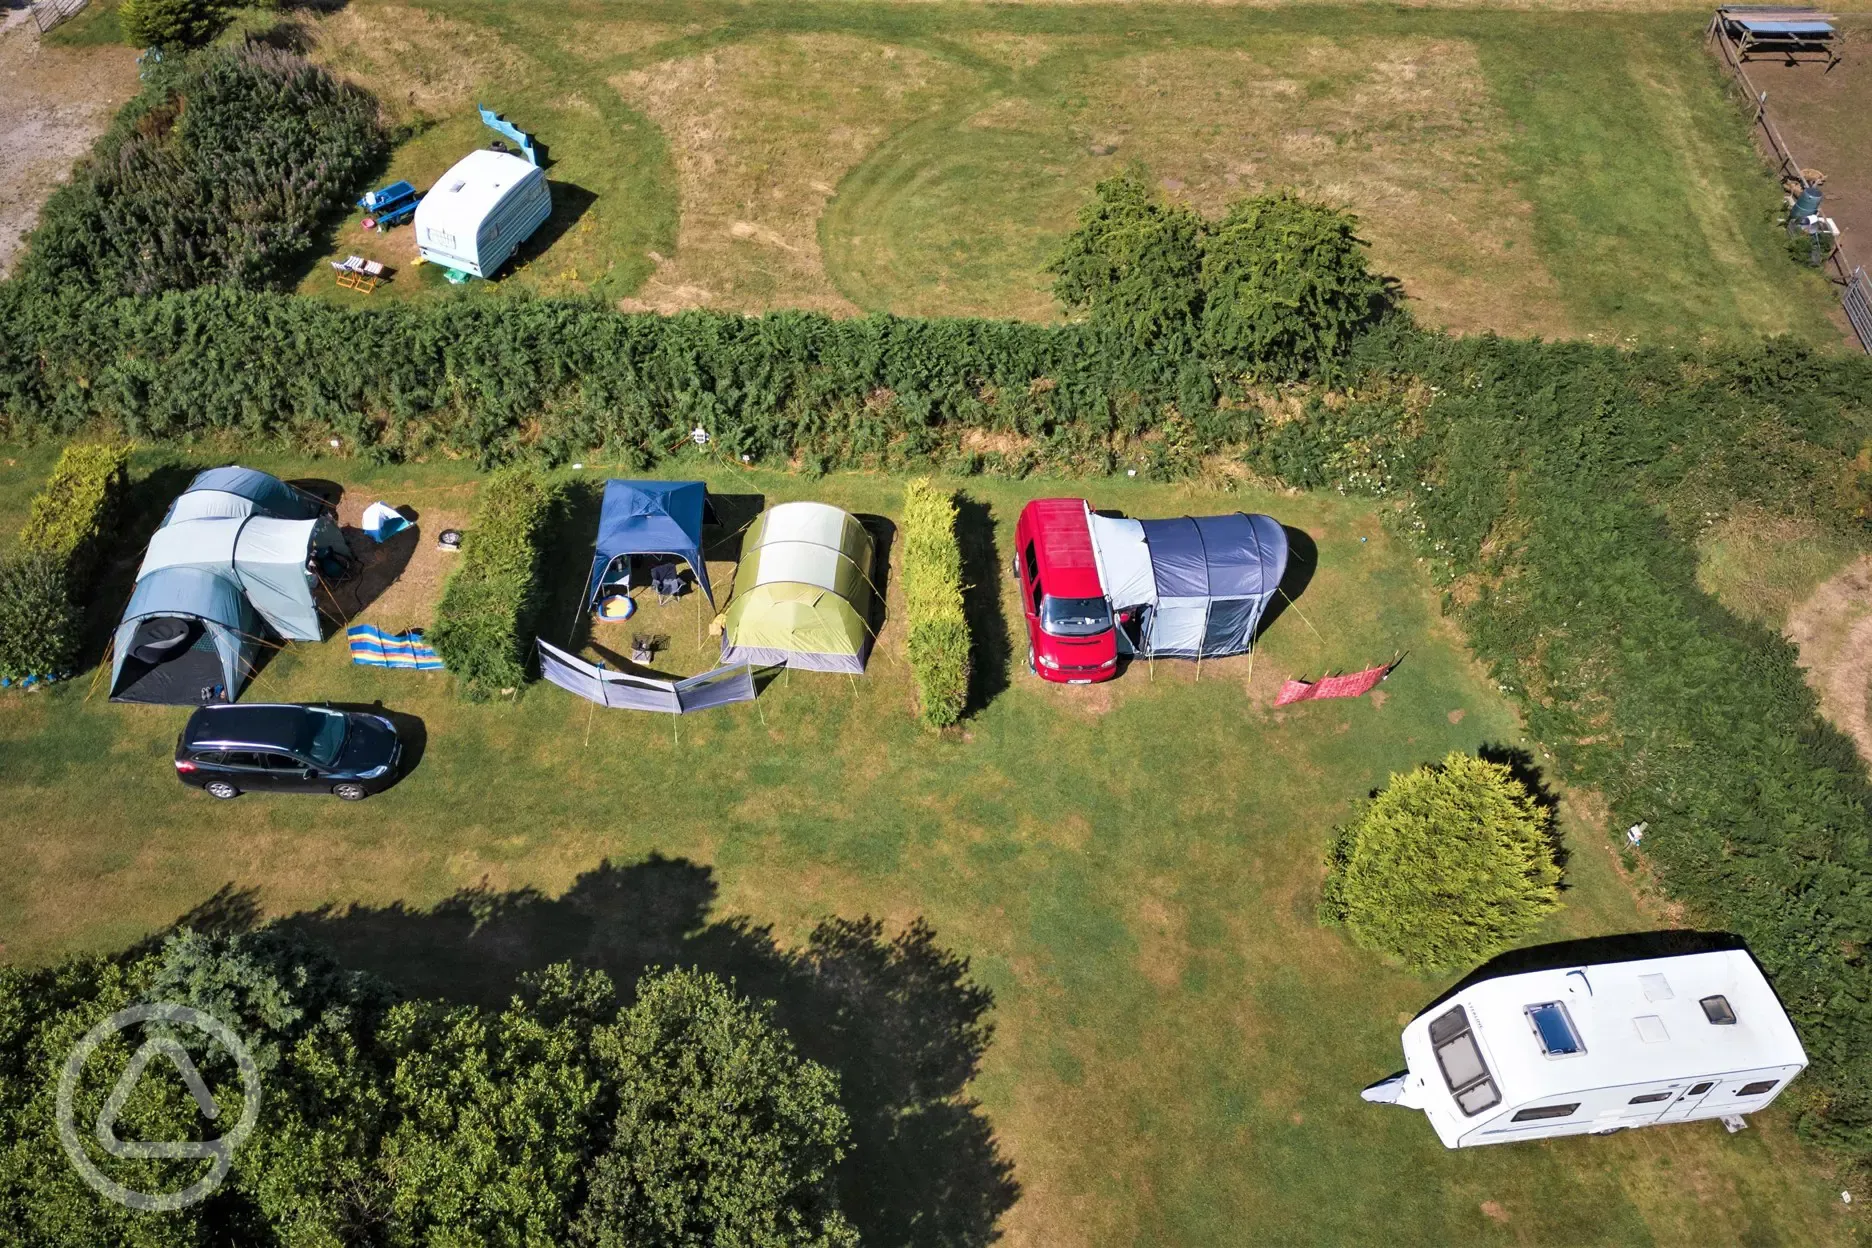 Bird's eye view of grass pitches